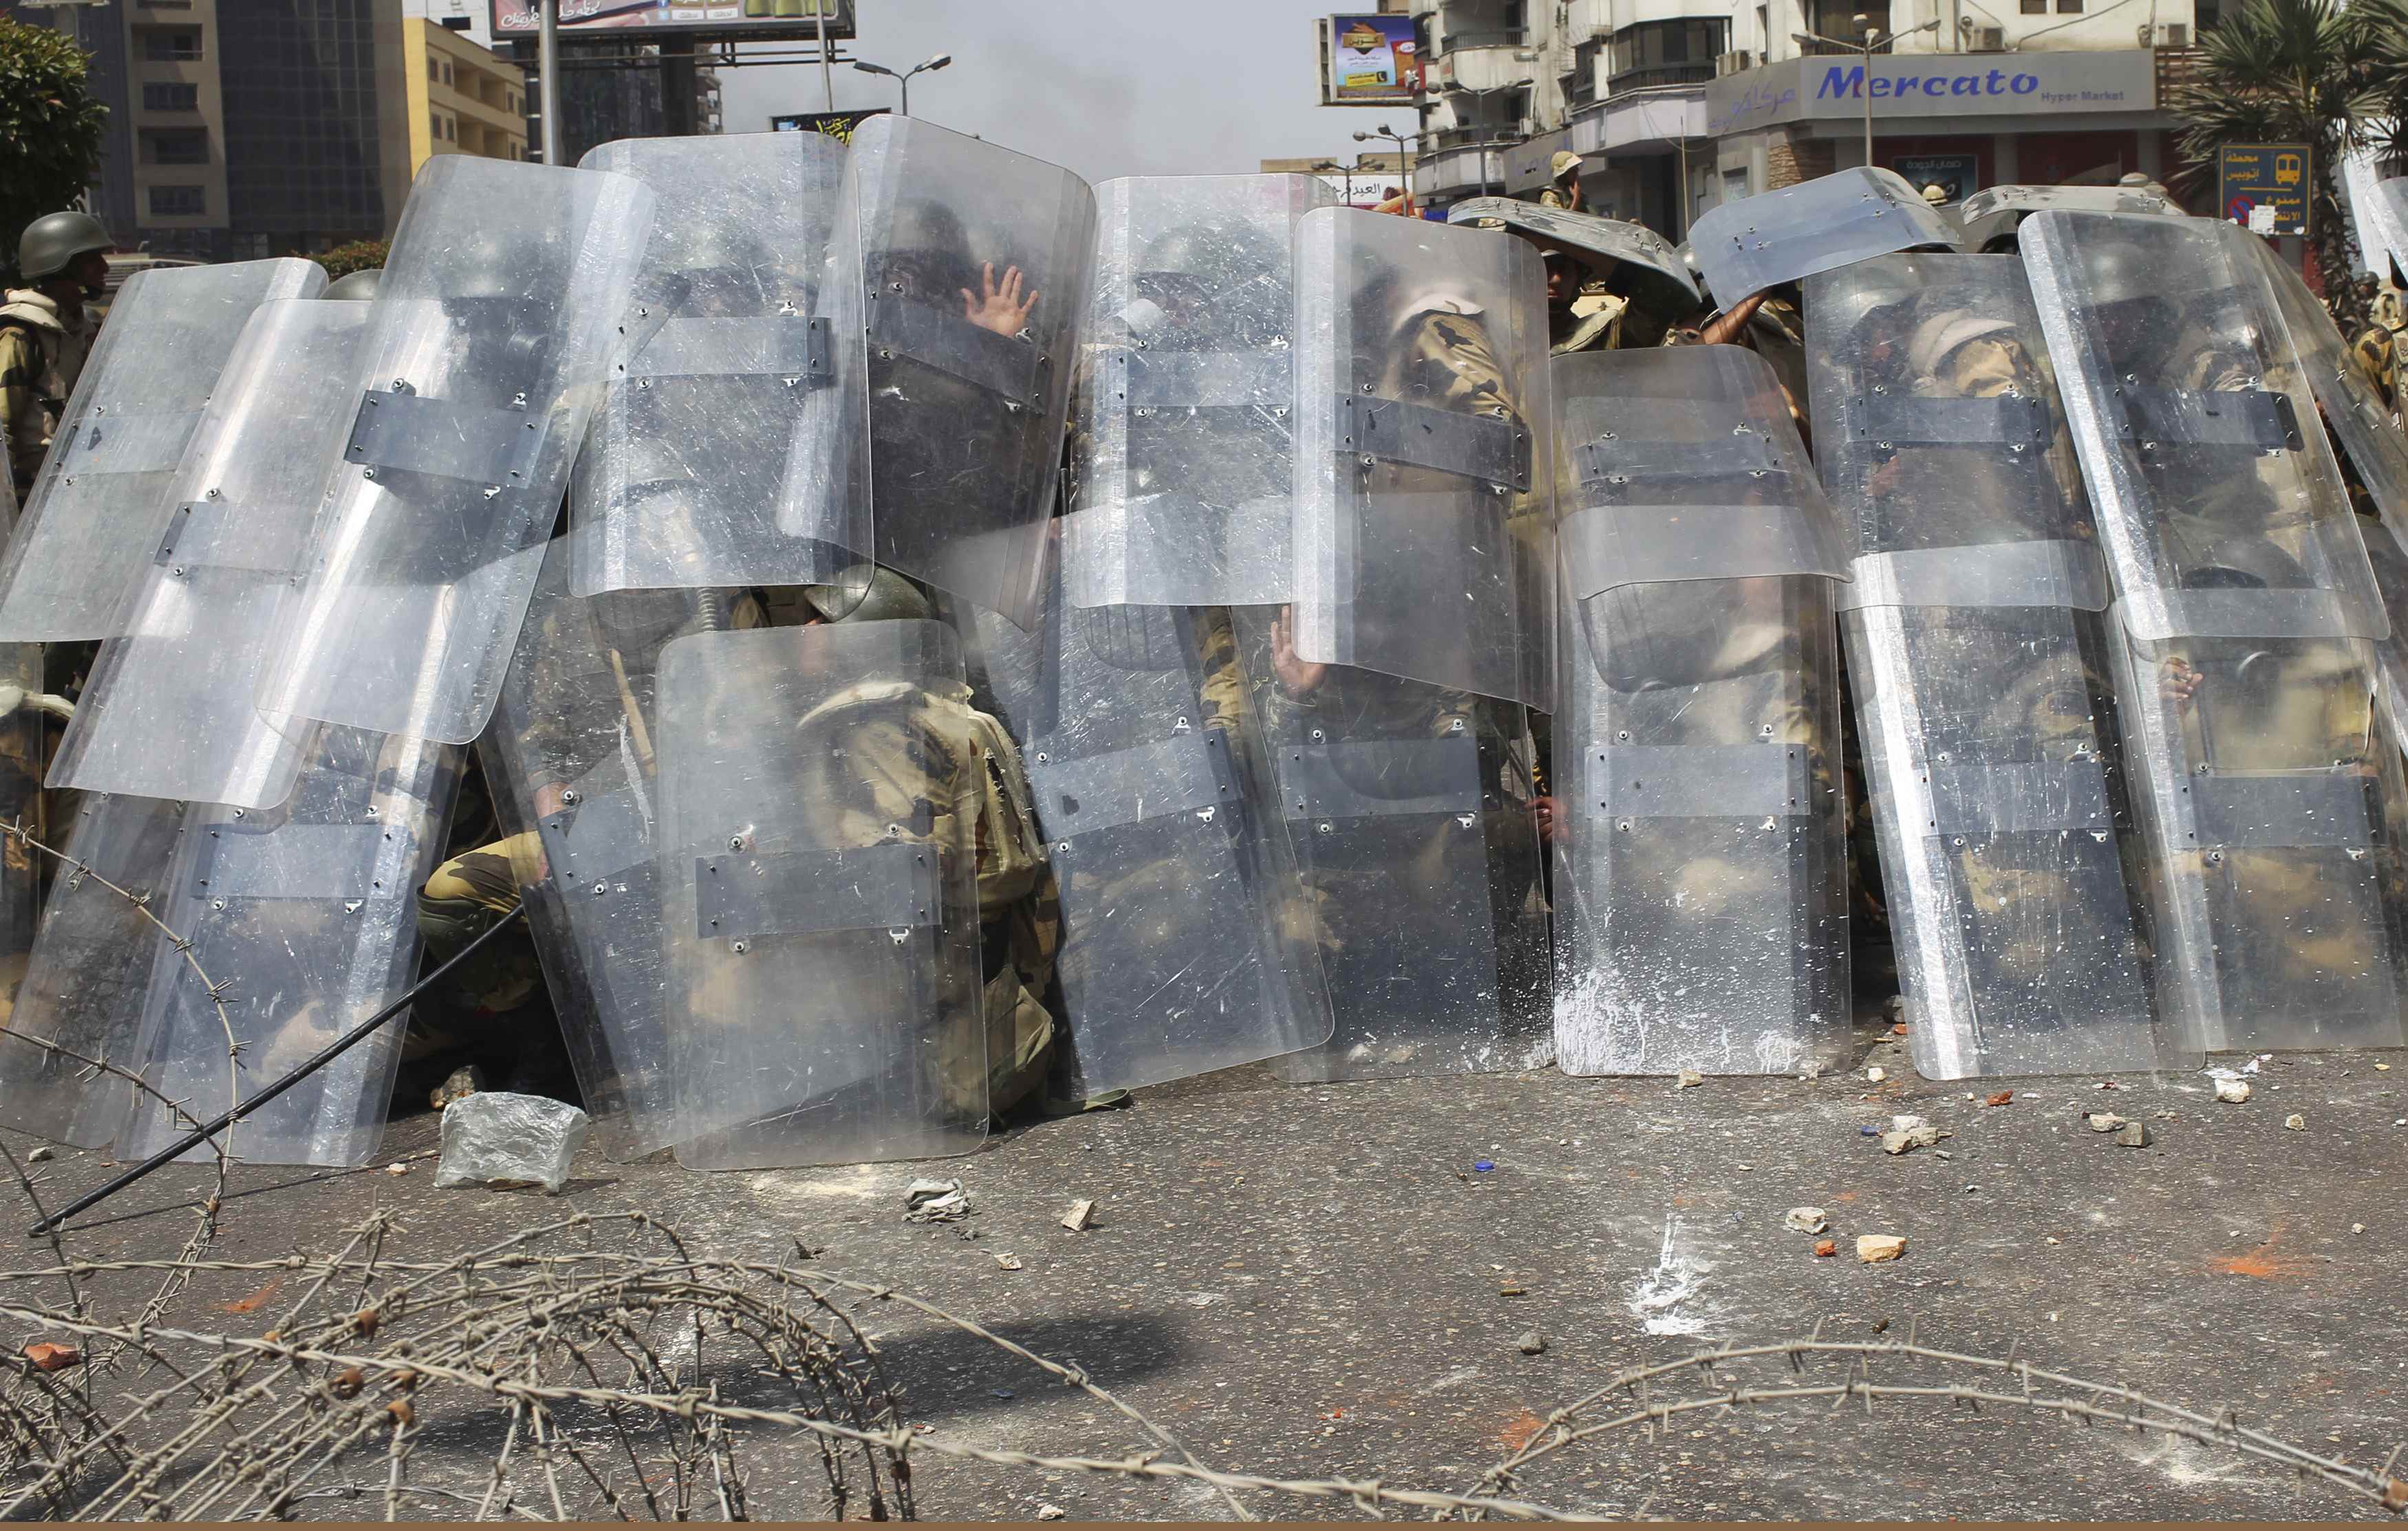 Riot police and army soldiers protect themselves with riot shields as members of the Muslim Brotherhood and supporters of ousted Egyptian President Mursi throw stones during clashes around the area of Rabaa Adawiya square